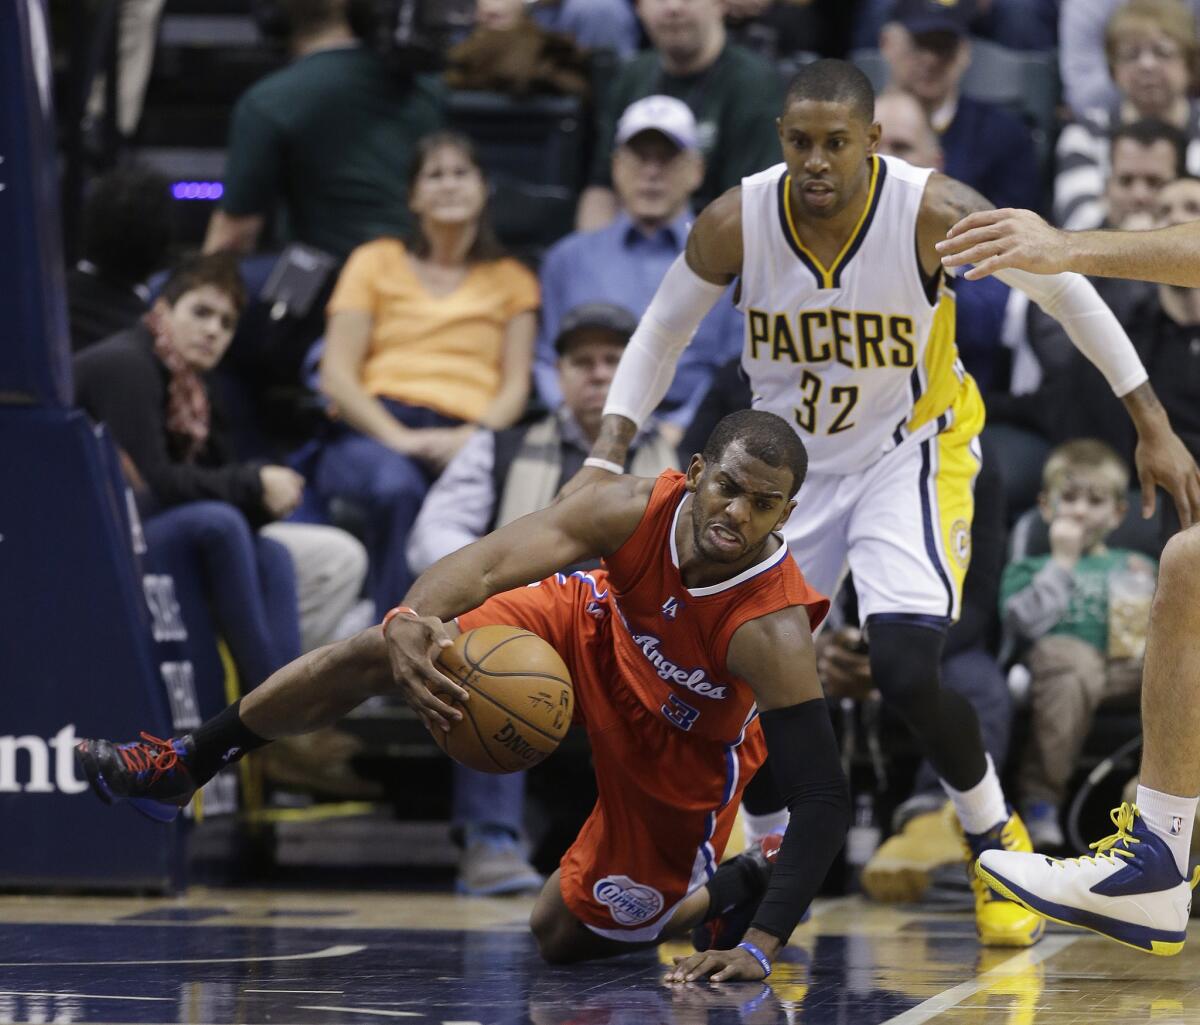 Clippers point guard Chris Paul falls to one knee while trying to maintain possession of the ball against the Pacers in the second half.